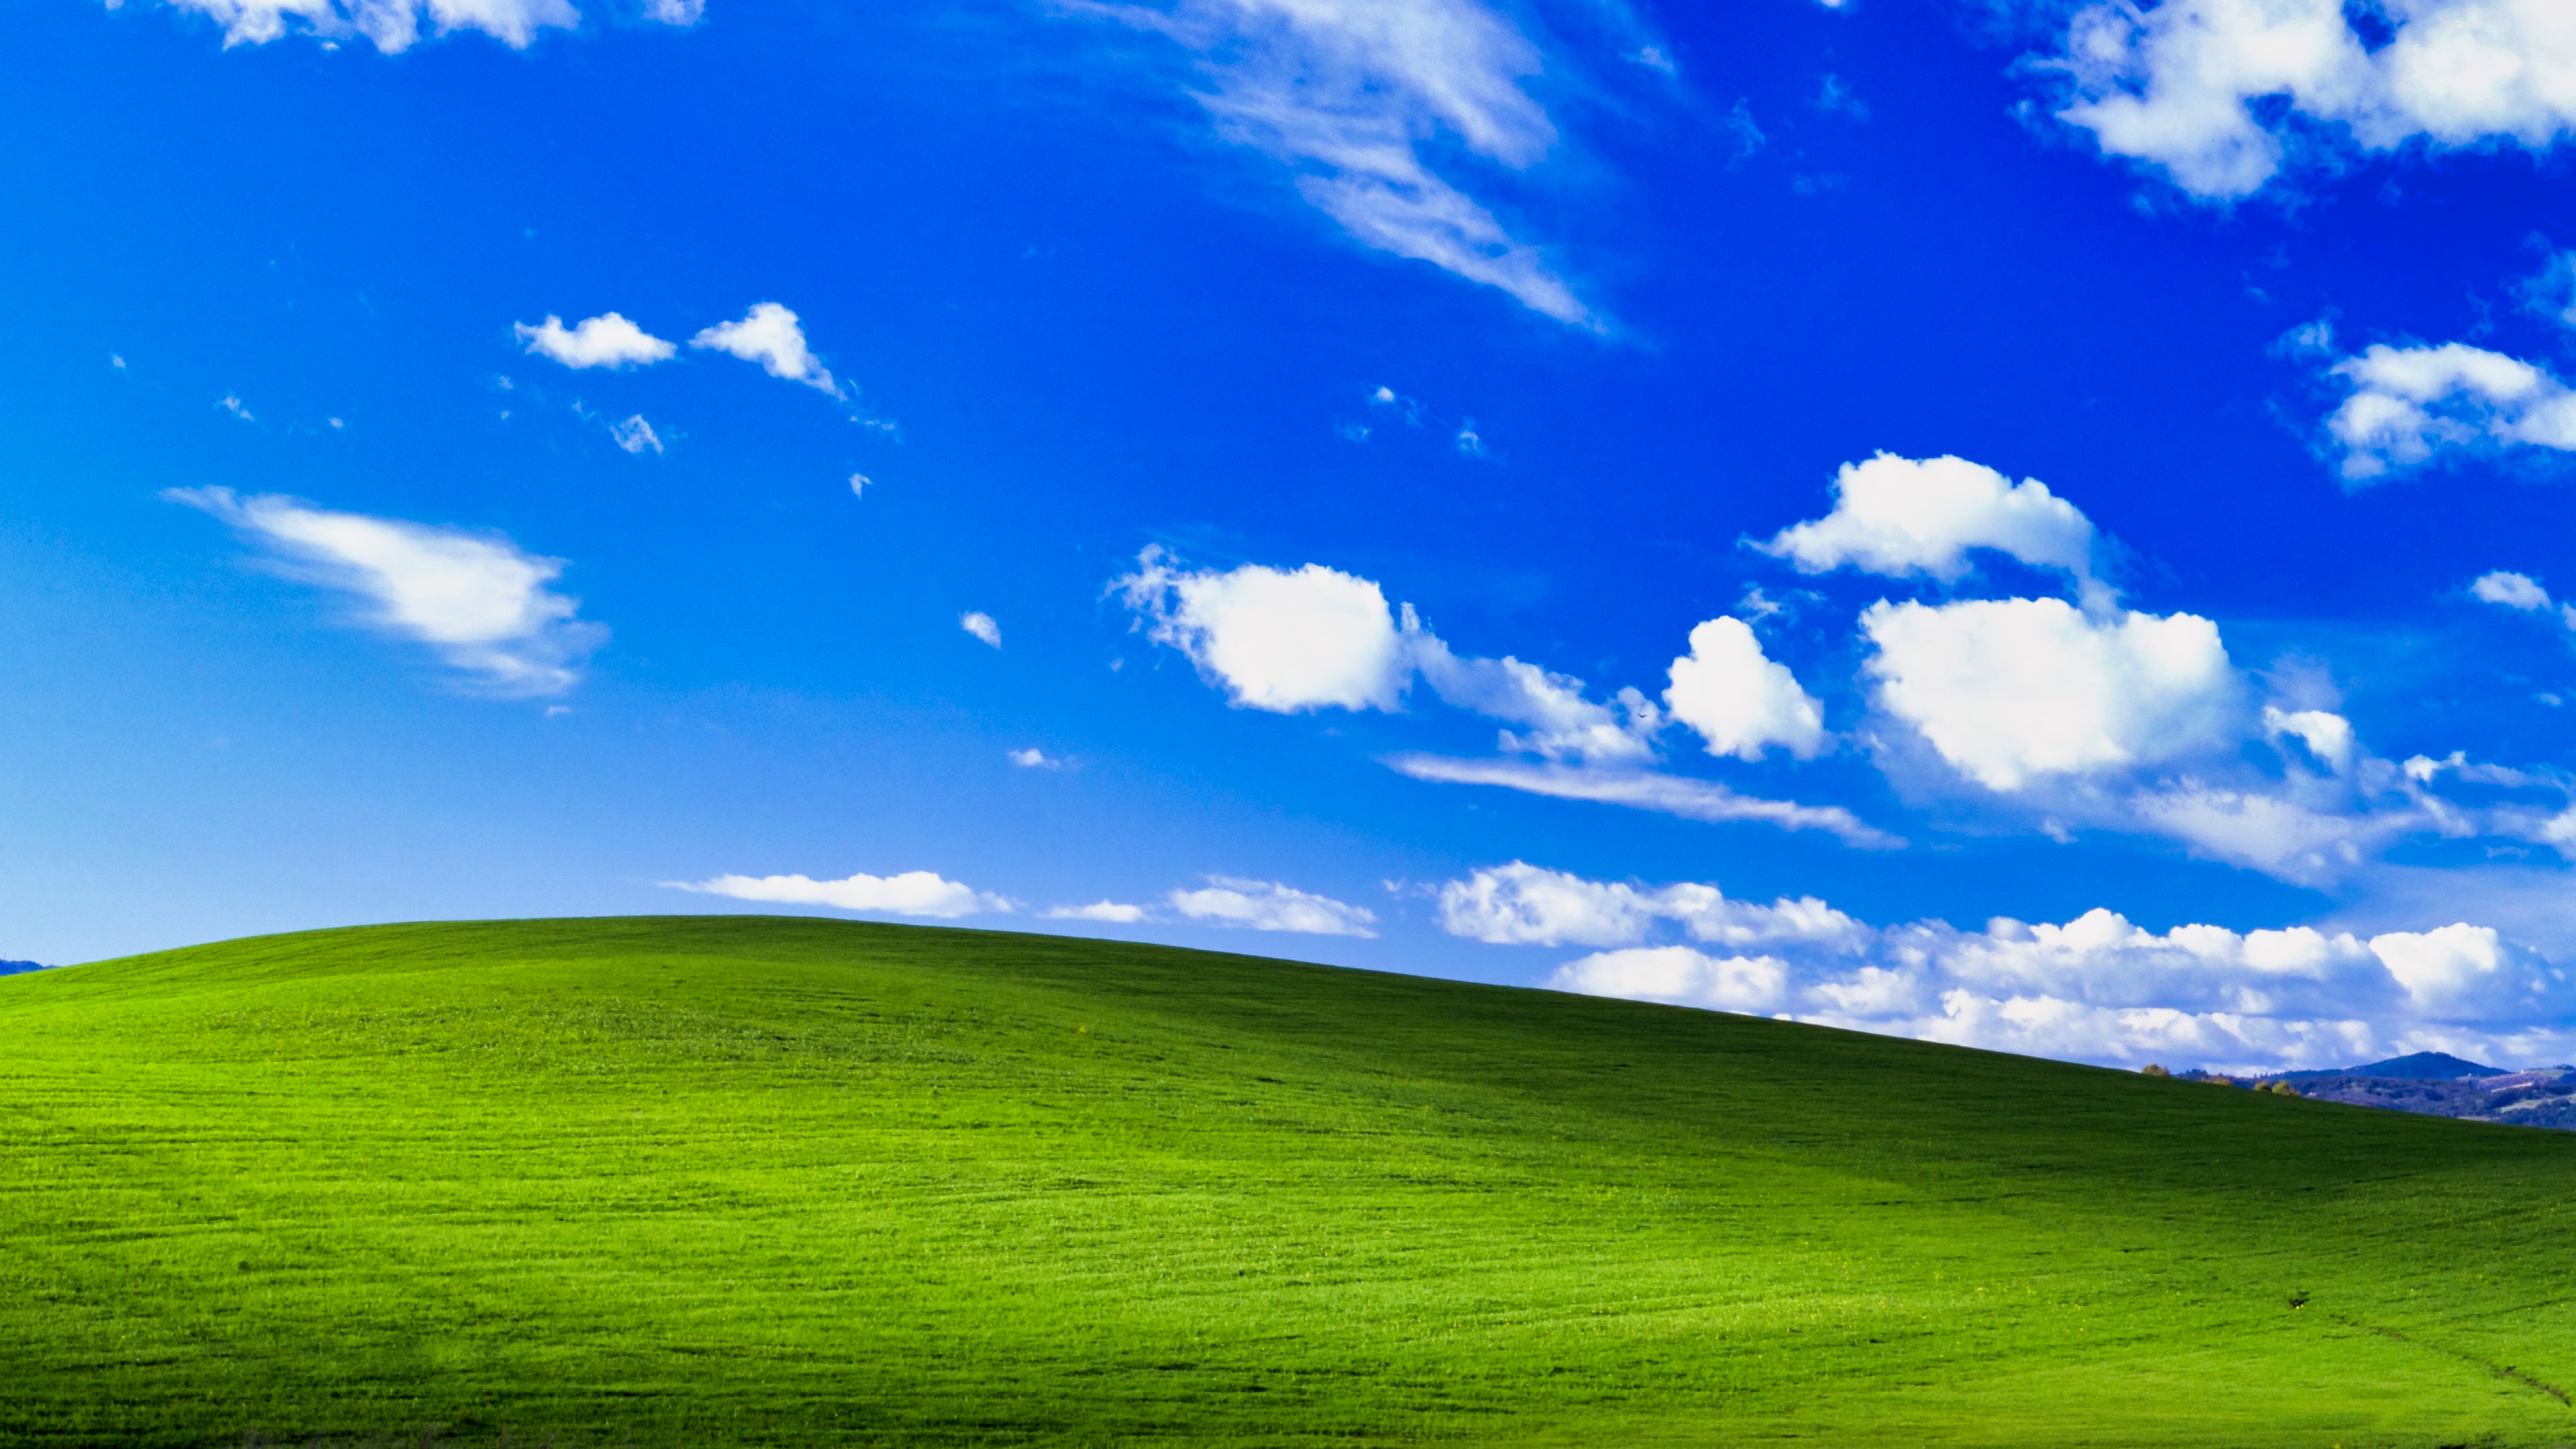 Windows Xp Wallpaper All - We have a massive amount of hd images that